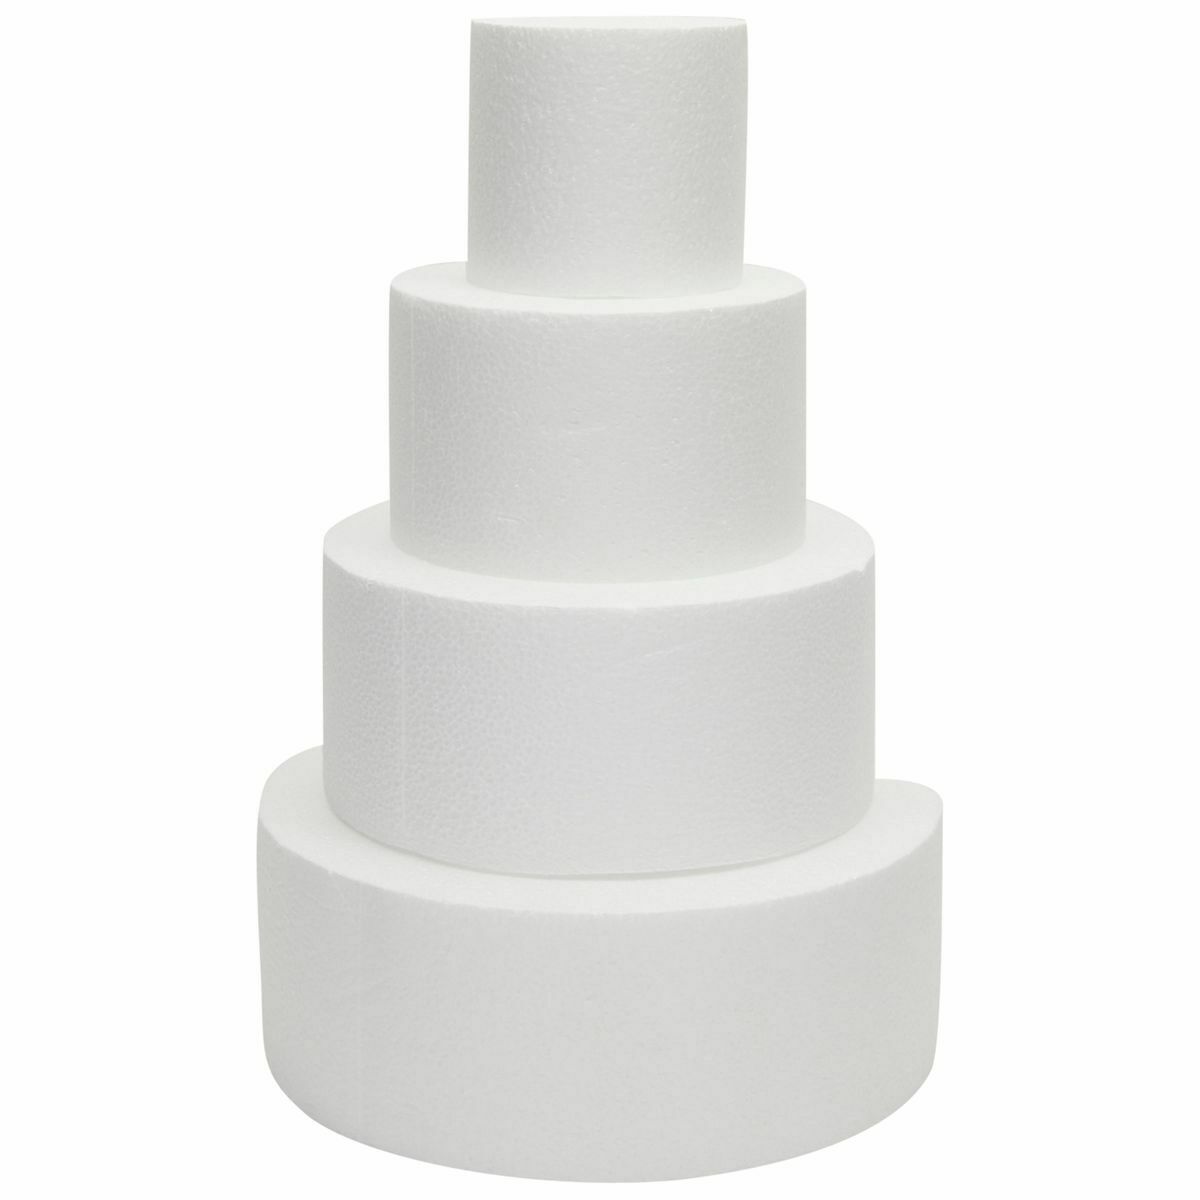 Foam Cake Dummy For Decorating And Wedding Display, 4 Tiers 4" 6" 8" 10" Dummies